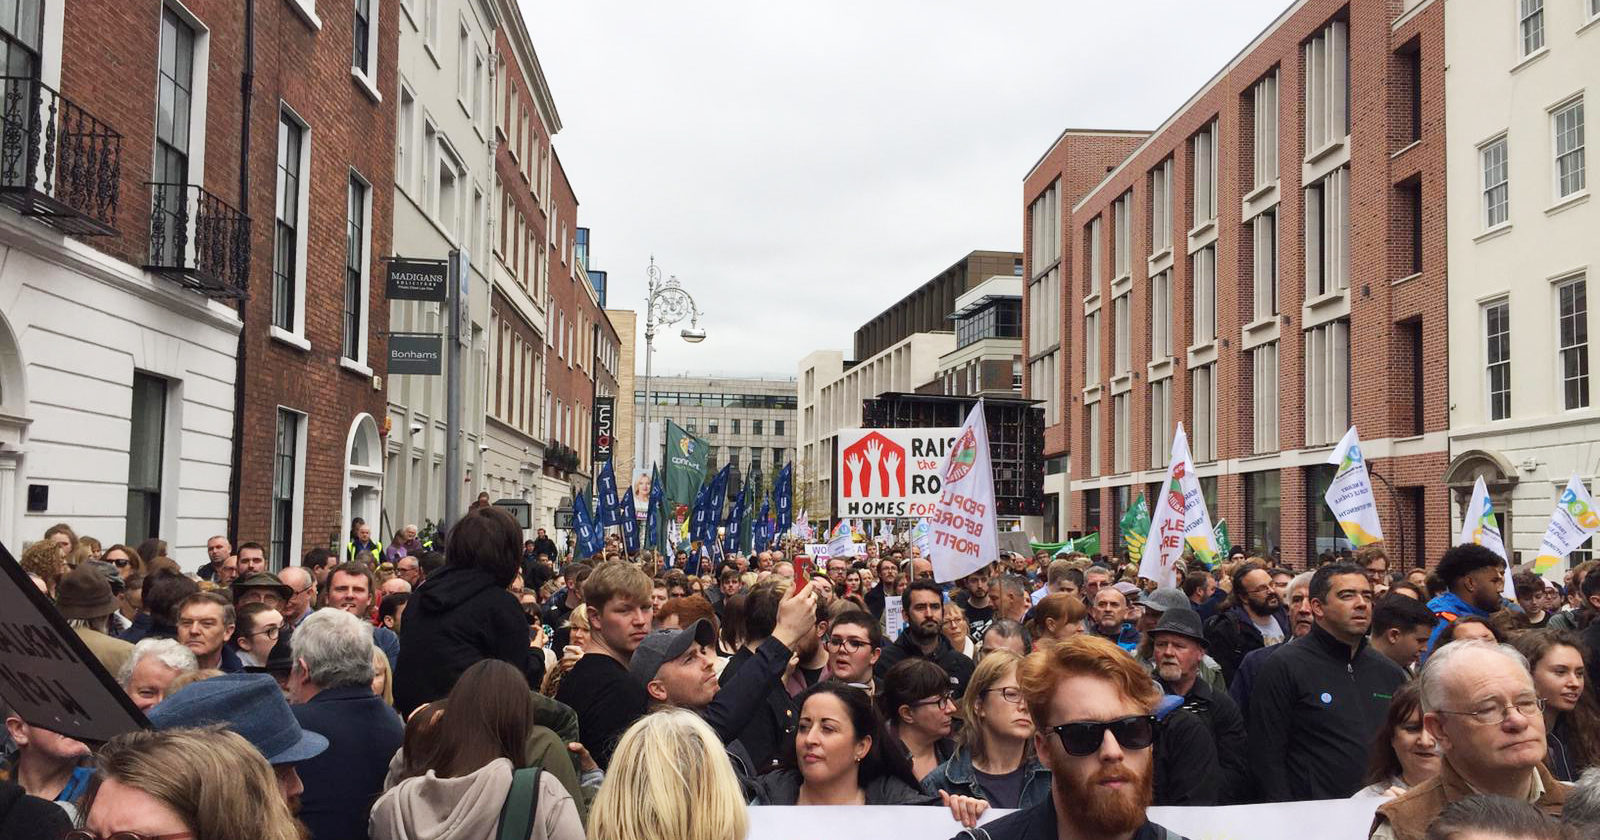 Hundreds of people fill the street outside Leinster House holding up banners in protest of the housing crisis